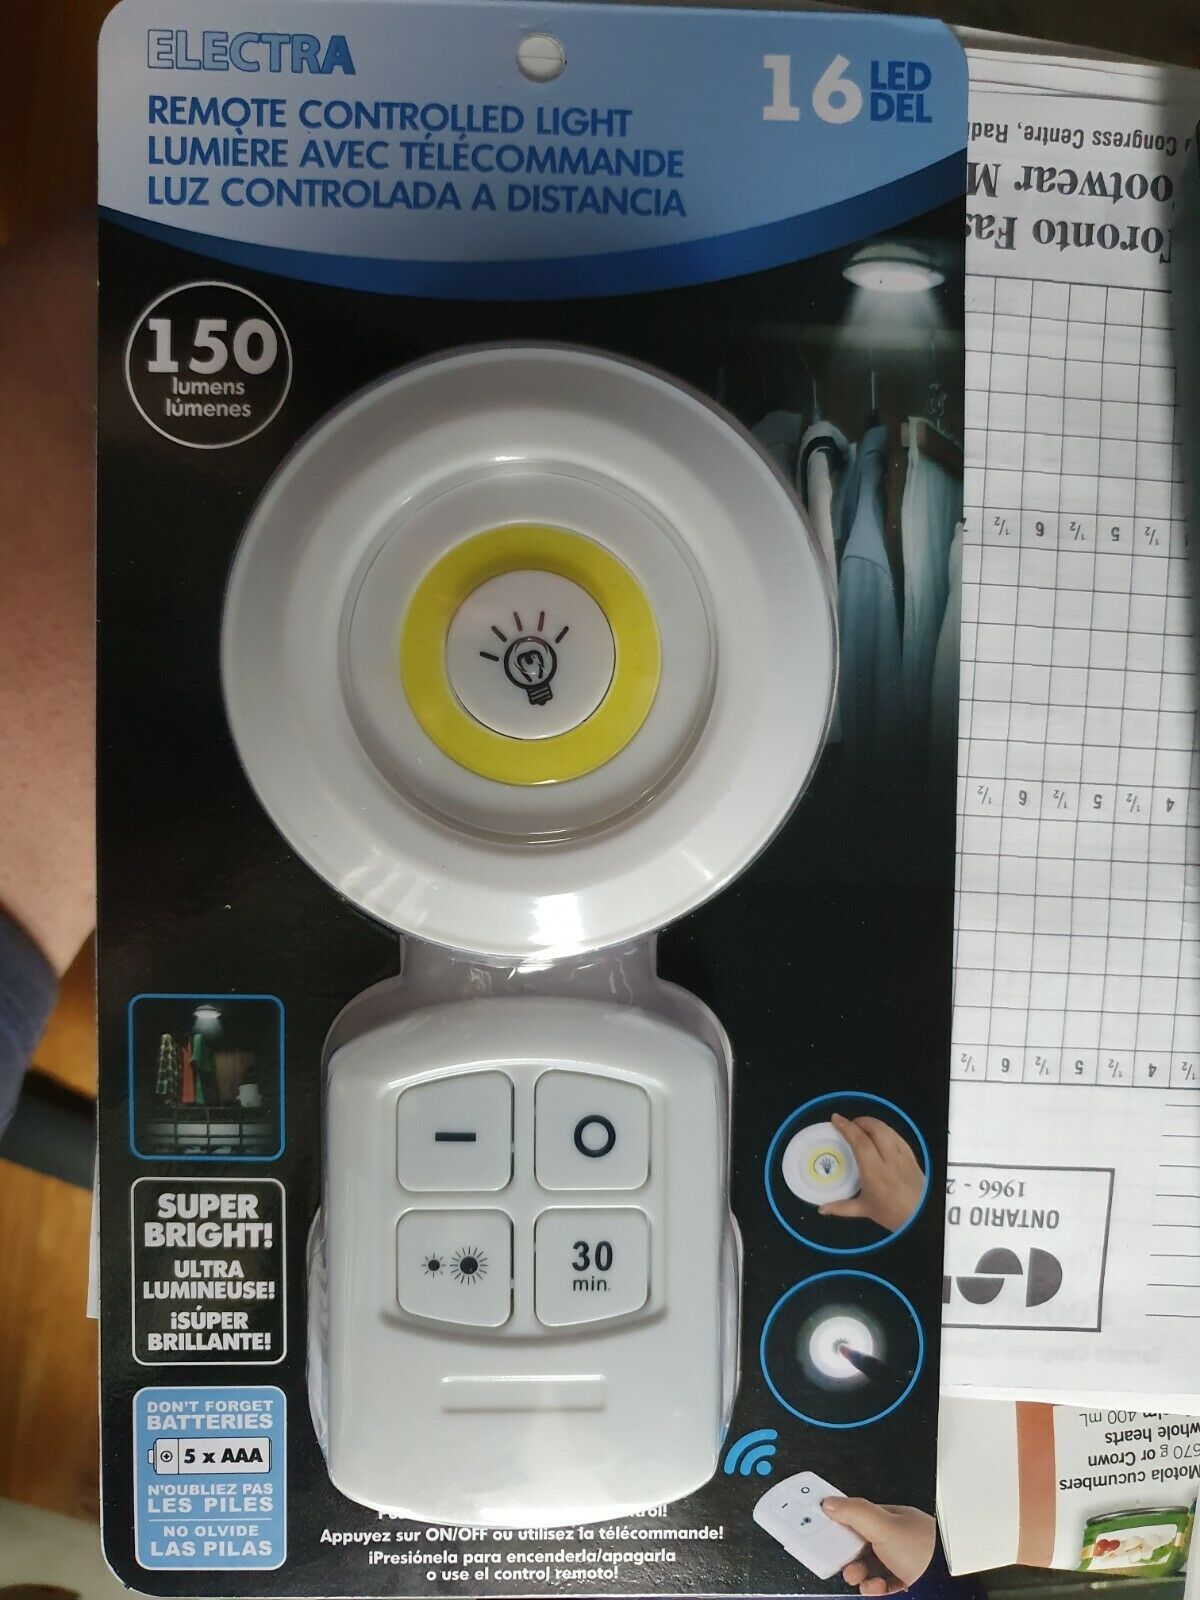 New Electra Remote Controlled Light and 44 similar items